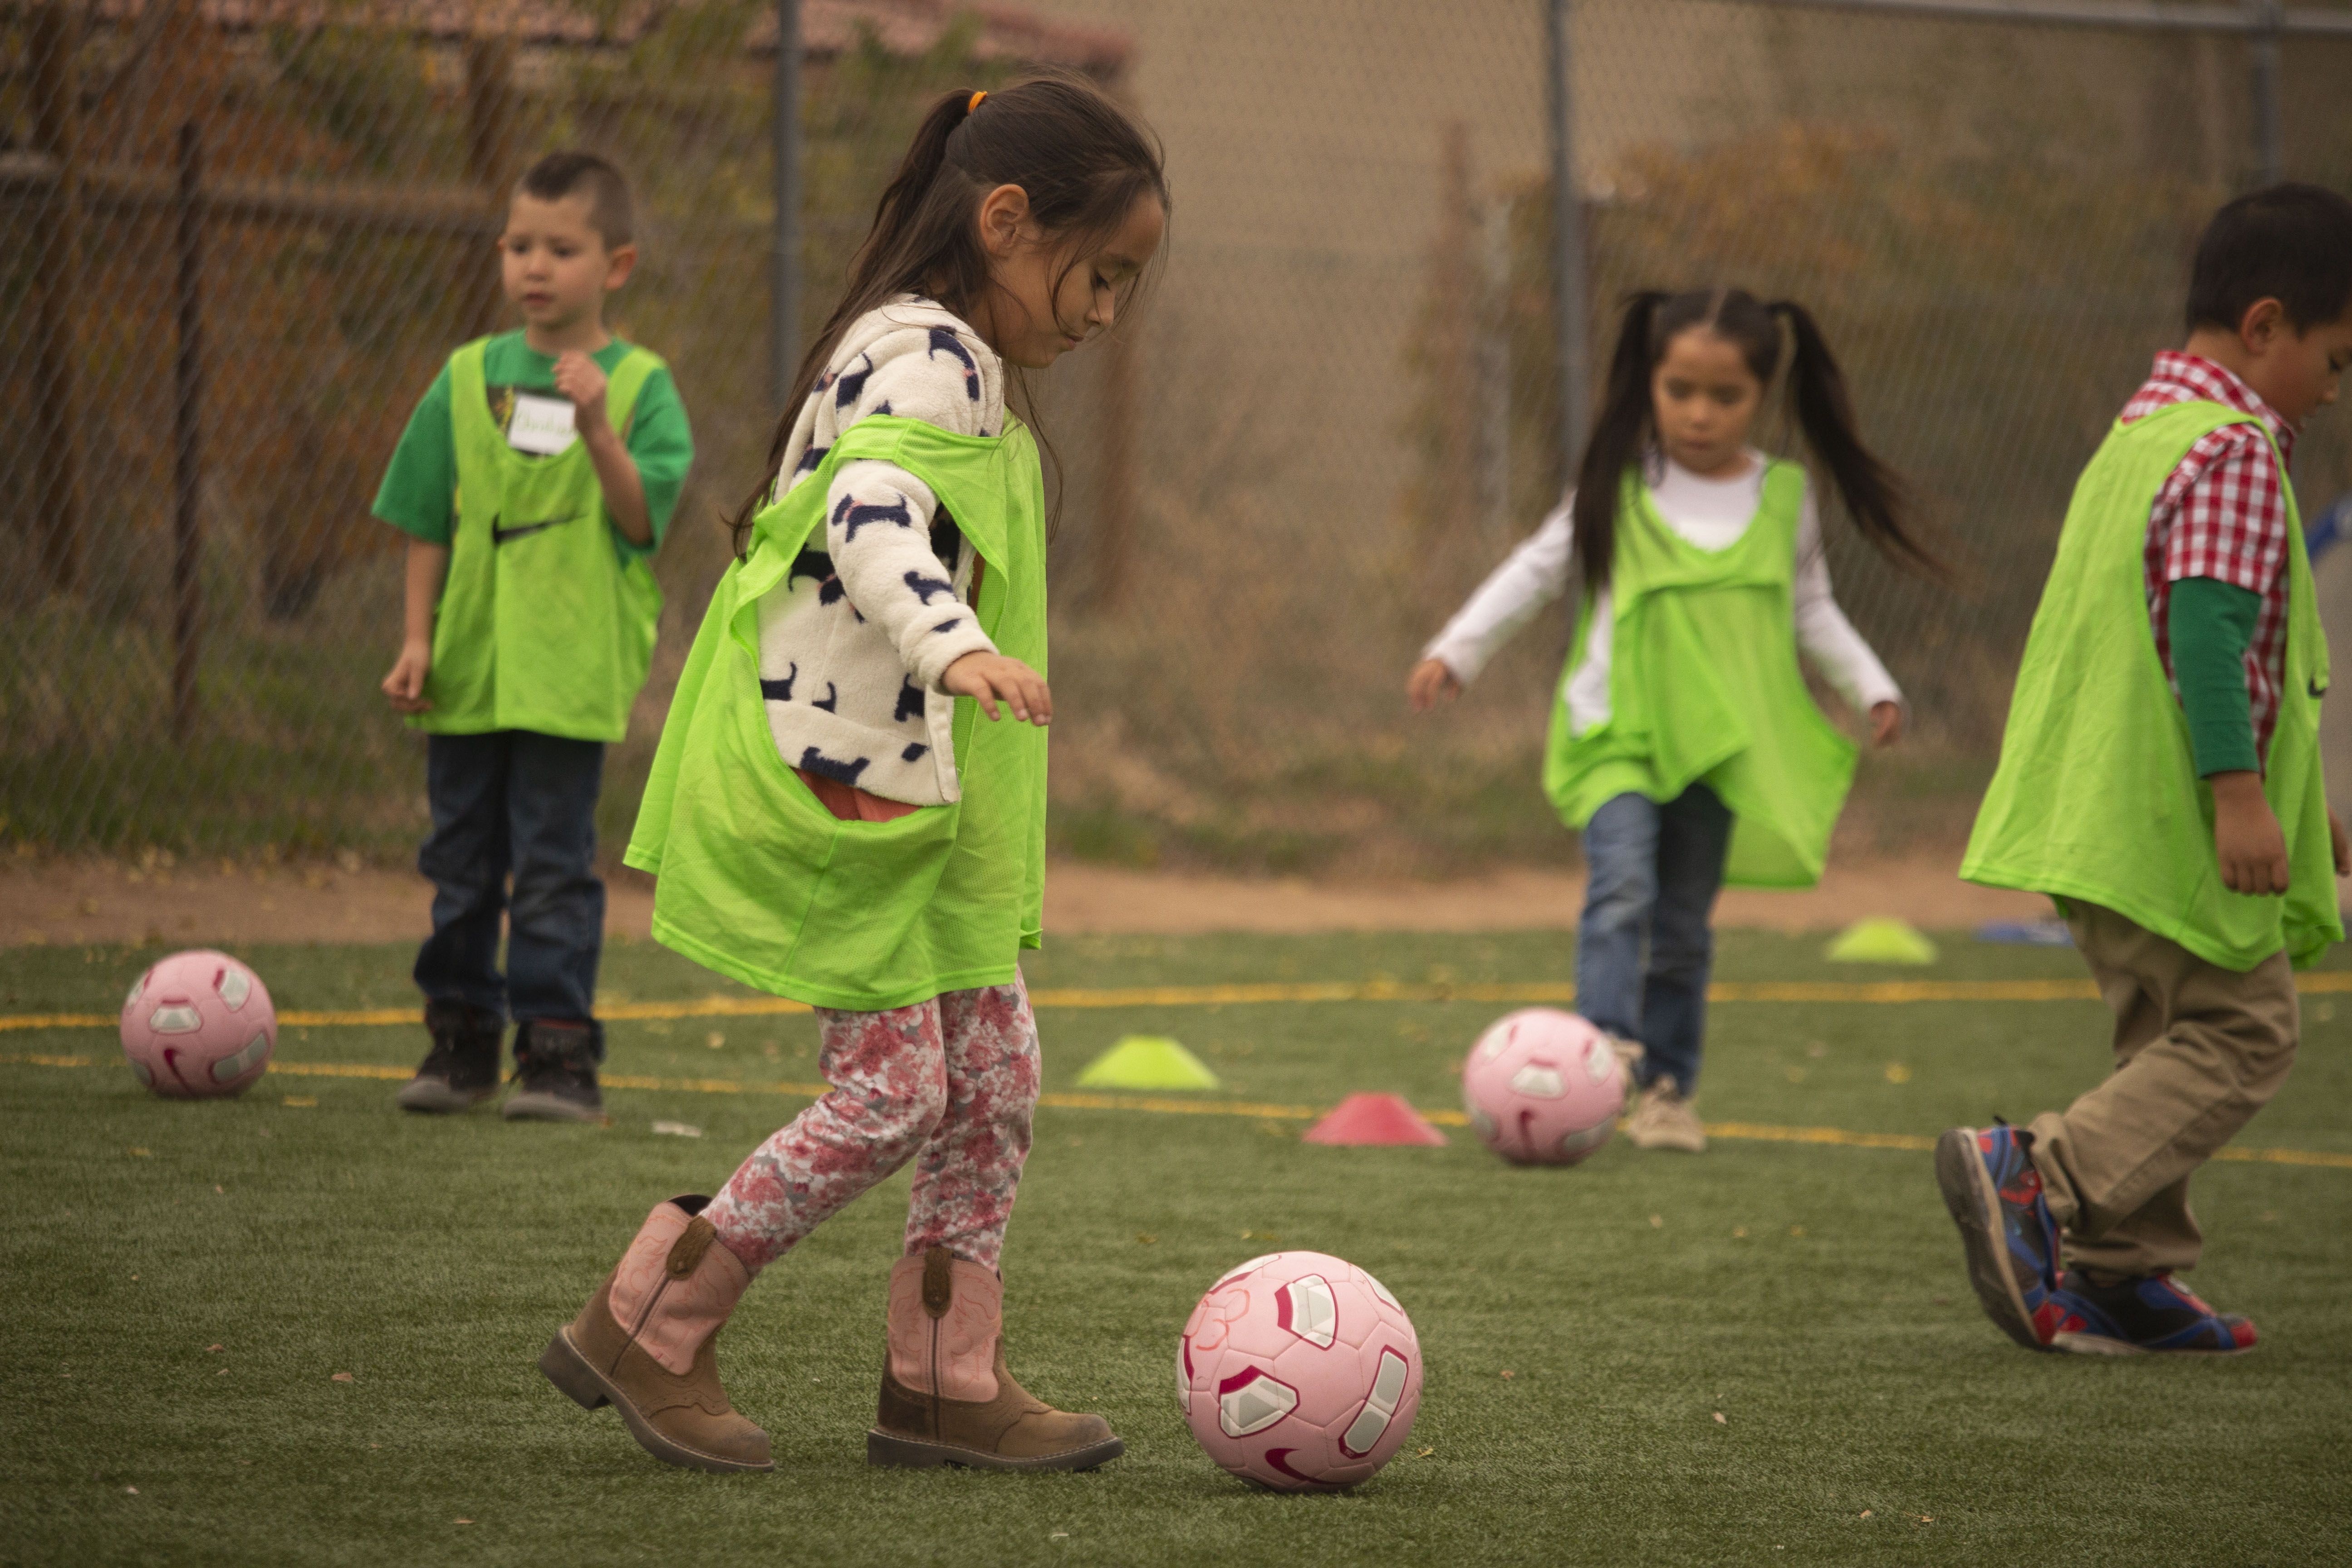 About 400 Carroll Elementary students in New Mexico participated in an all day soccer and leadership clinic, hosted by the Notah Begay III foundation. Image by Viridiana Vidales Coyt. United States, 2017.